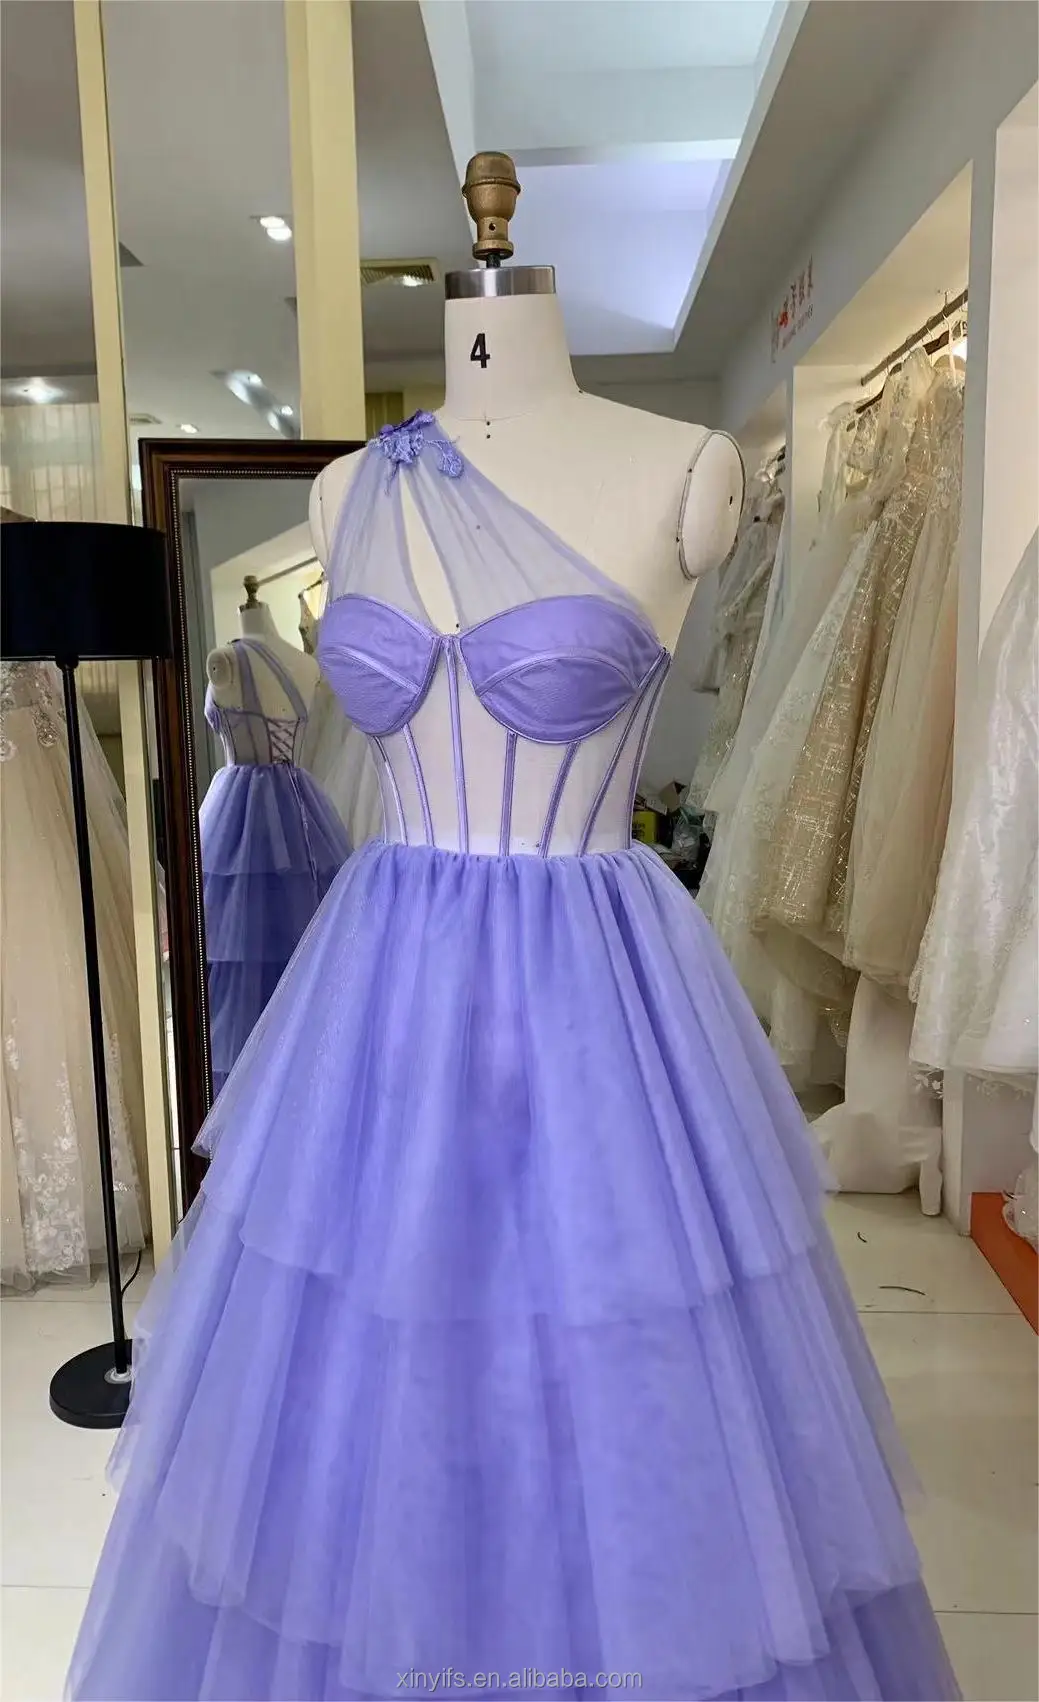 OEM Wholesale Undefined One Shoulder Skirt Prom Dress Fitted Corset Boning Bodice Ruffle A Line Princess